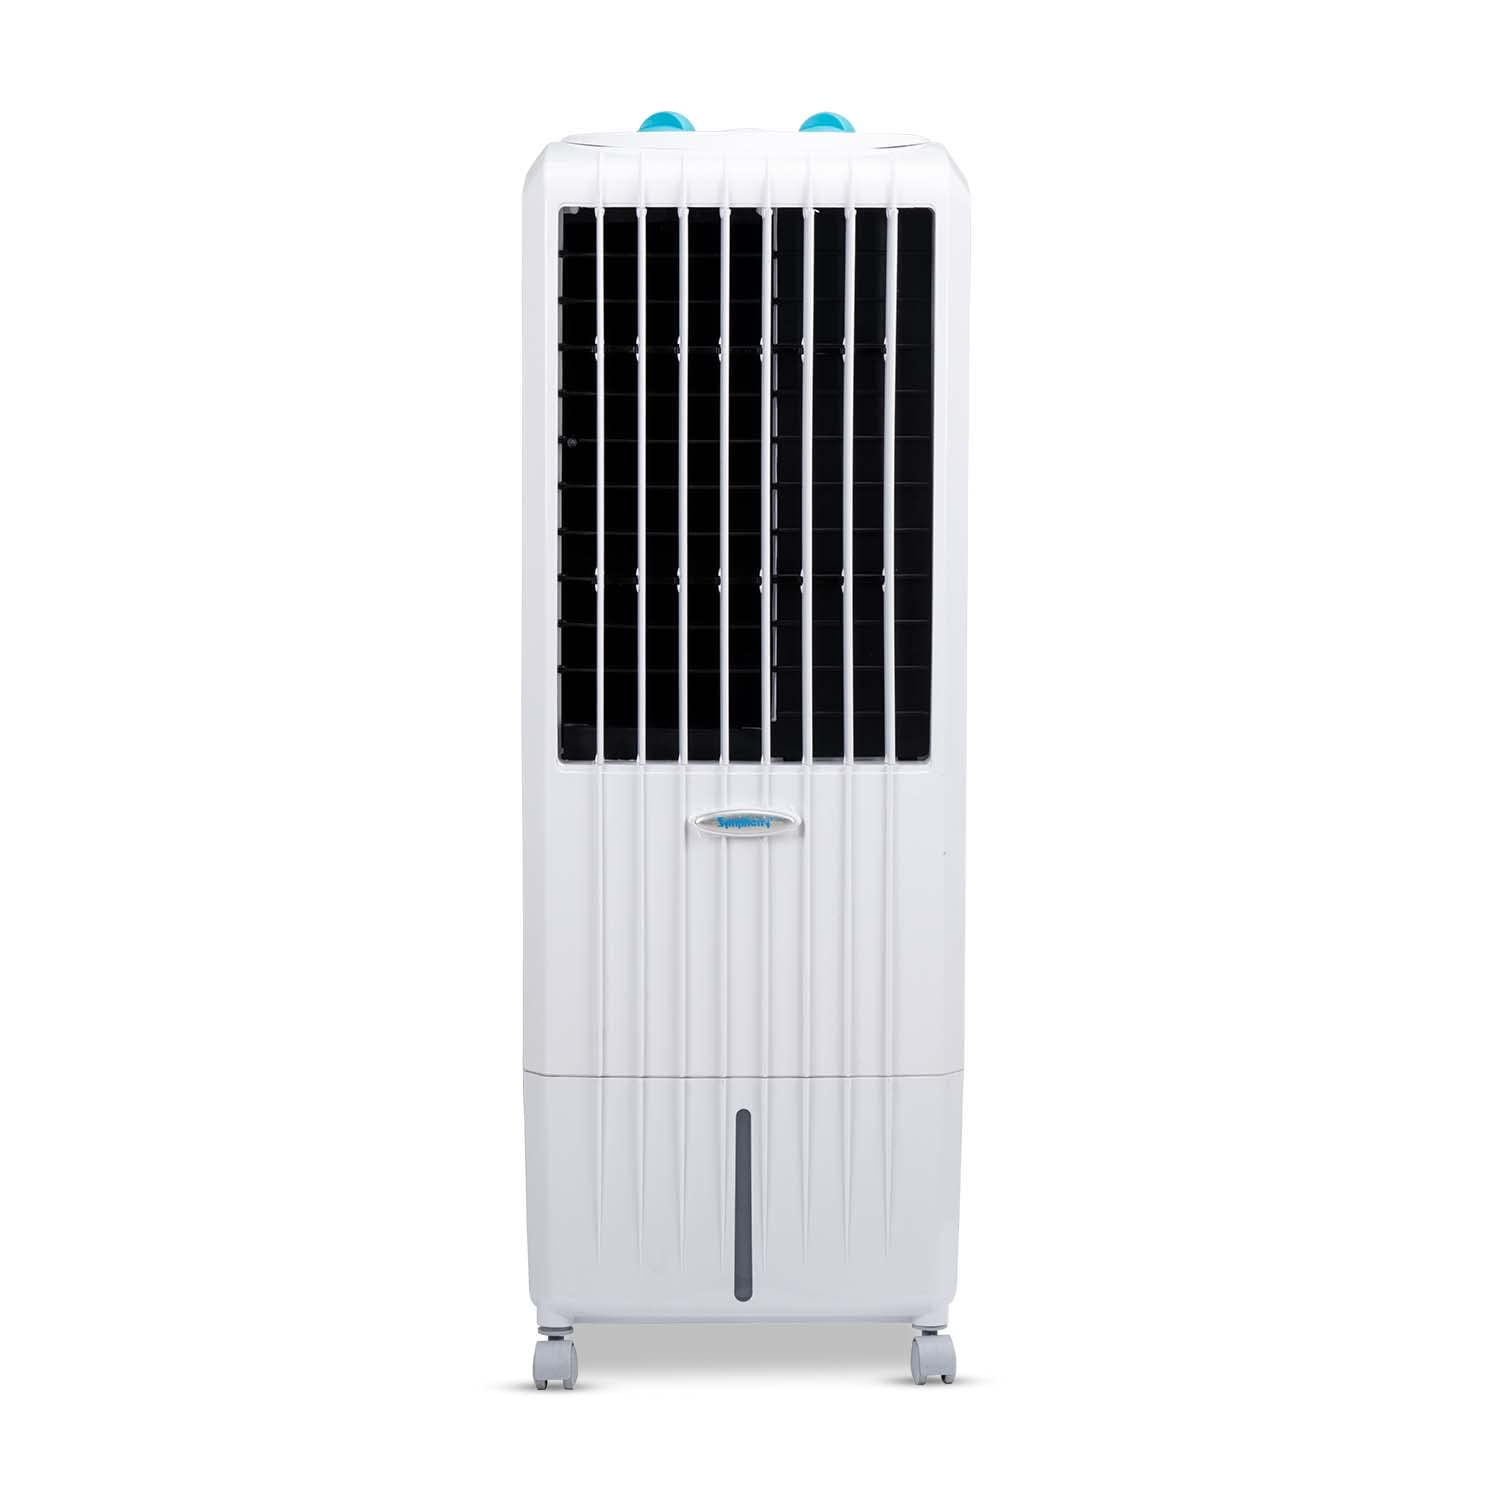 Crompton Ozone 75-Litre Desert Air Cooler with Honeycomb Pads for Home and Commercial (White and Teal)